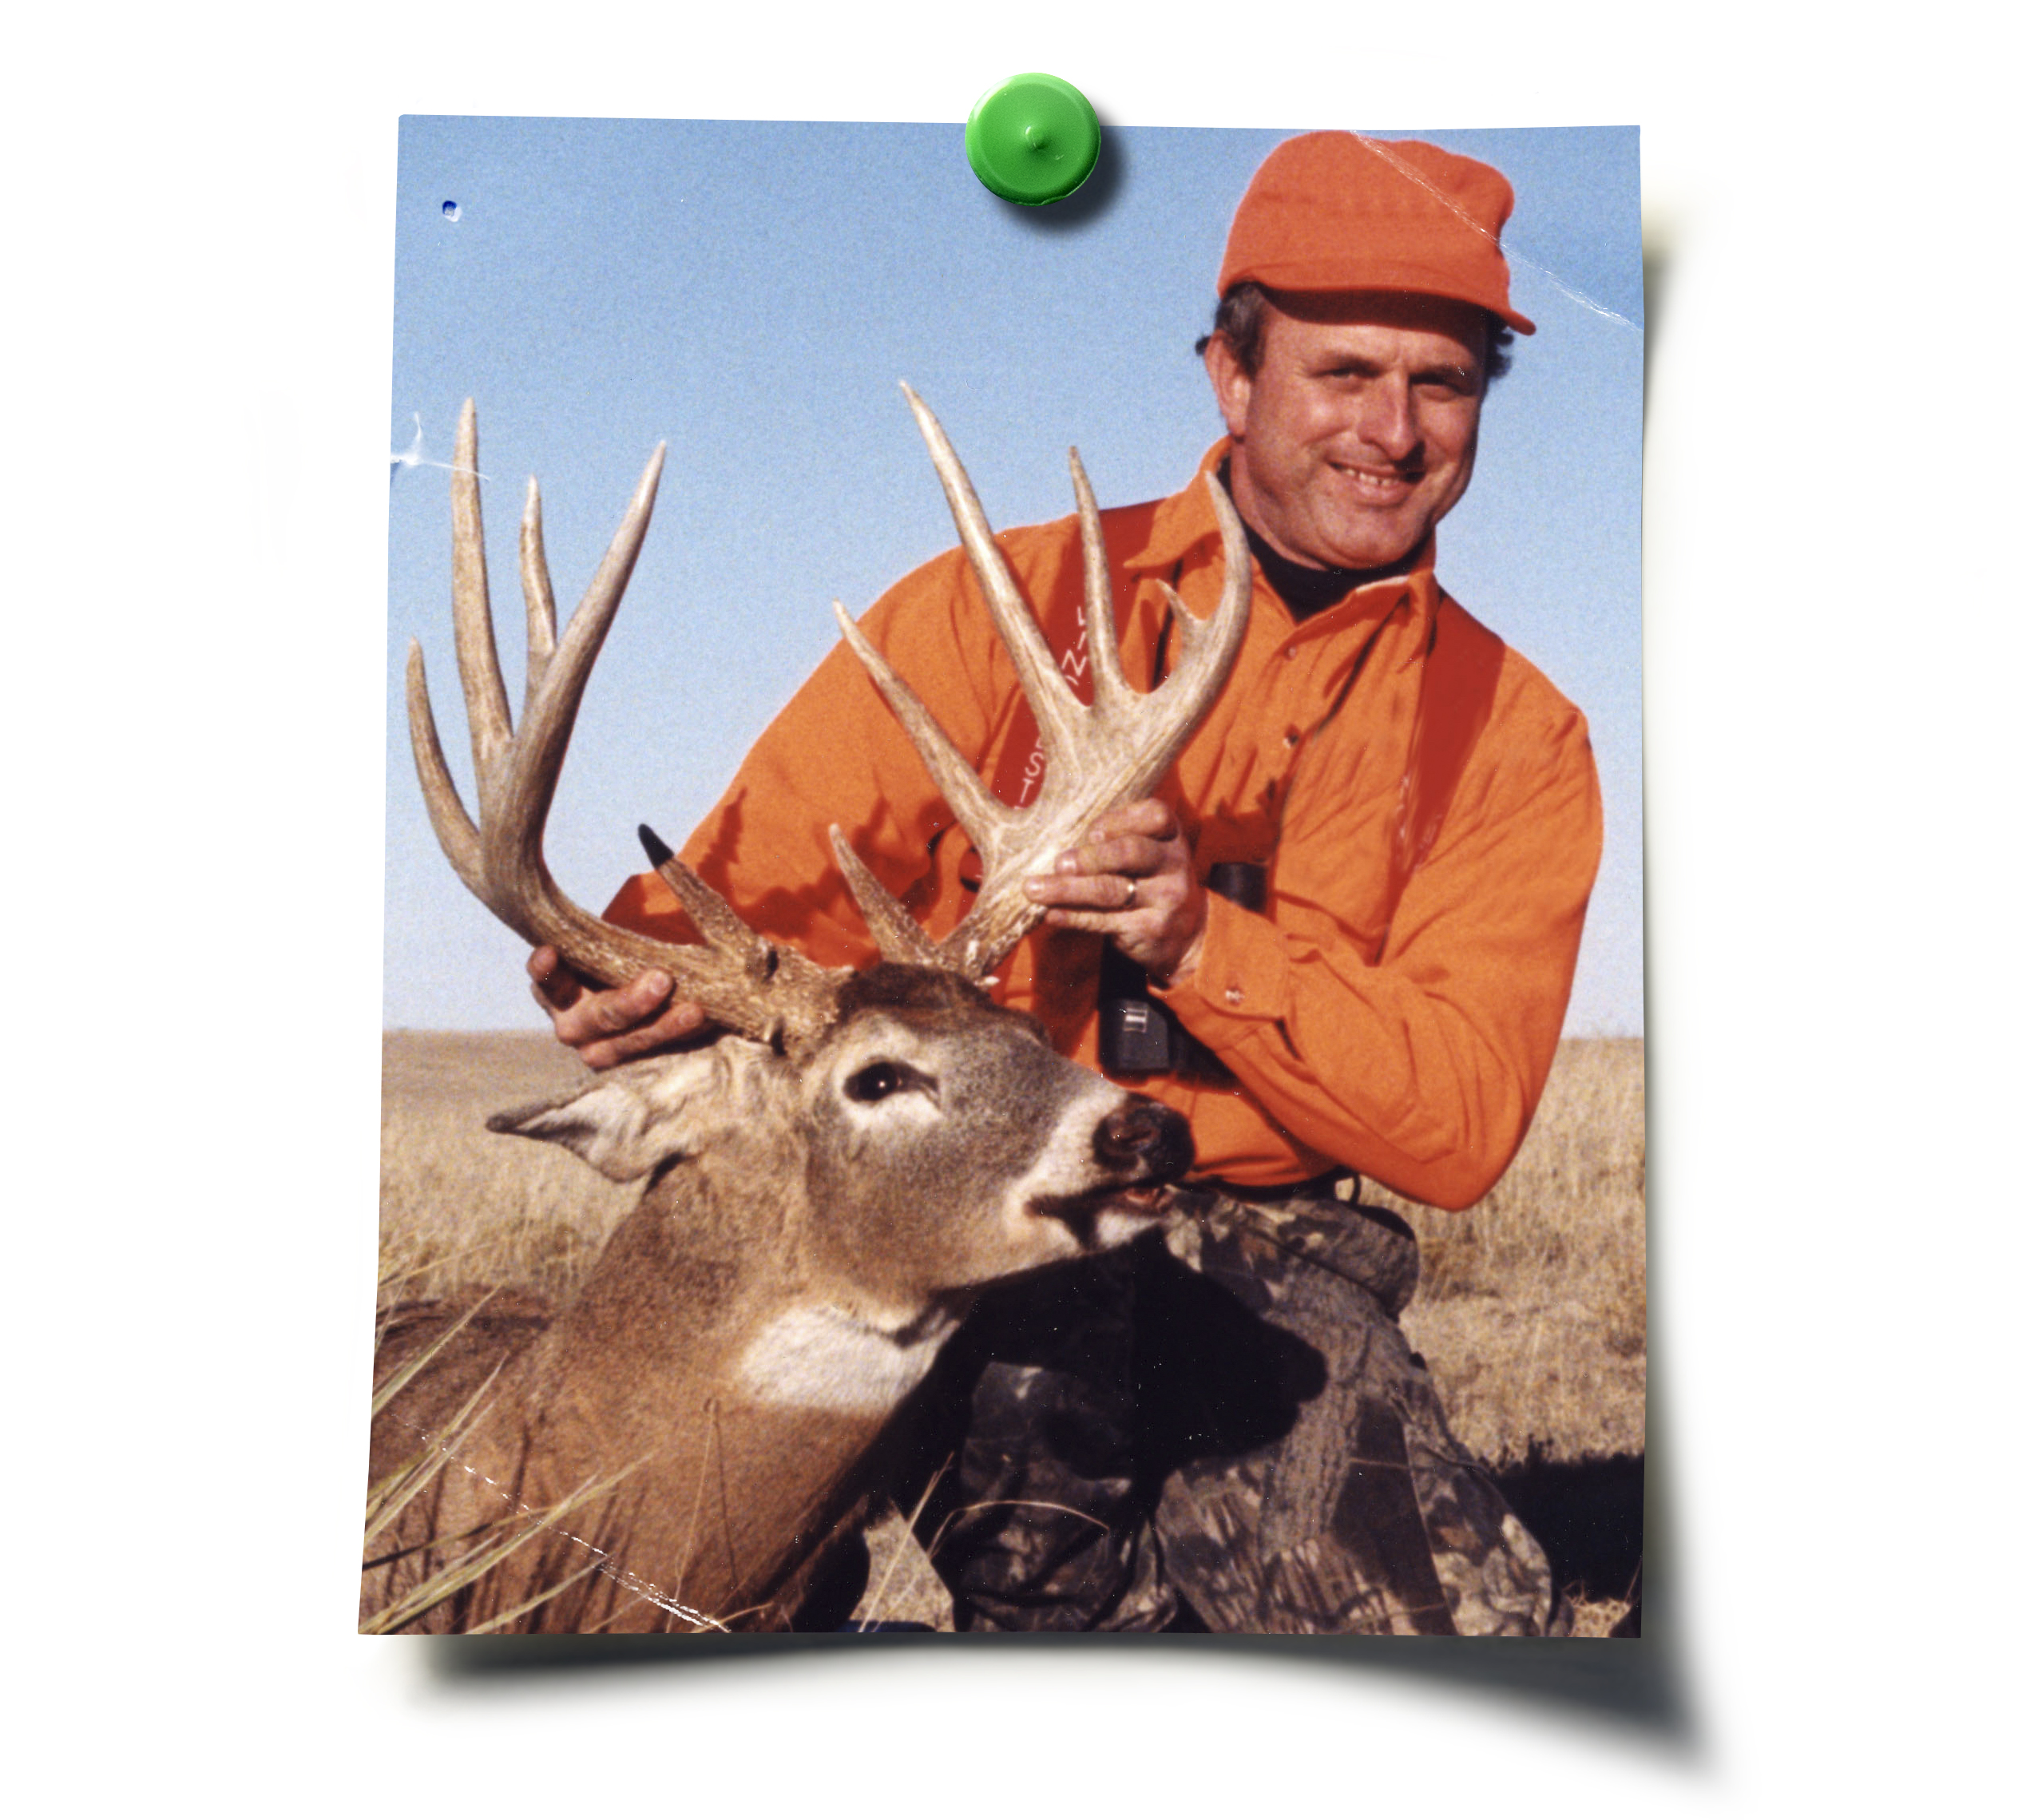 A baby boomer with a big buck in the 90s.